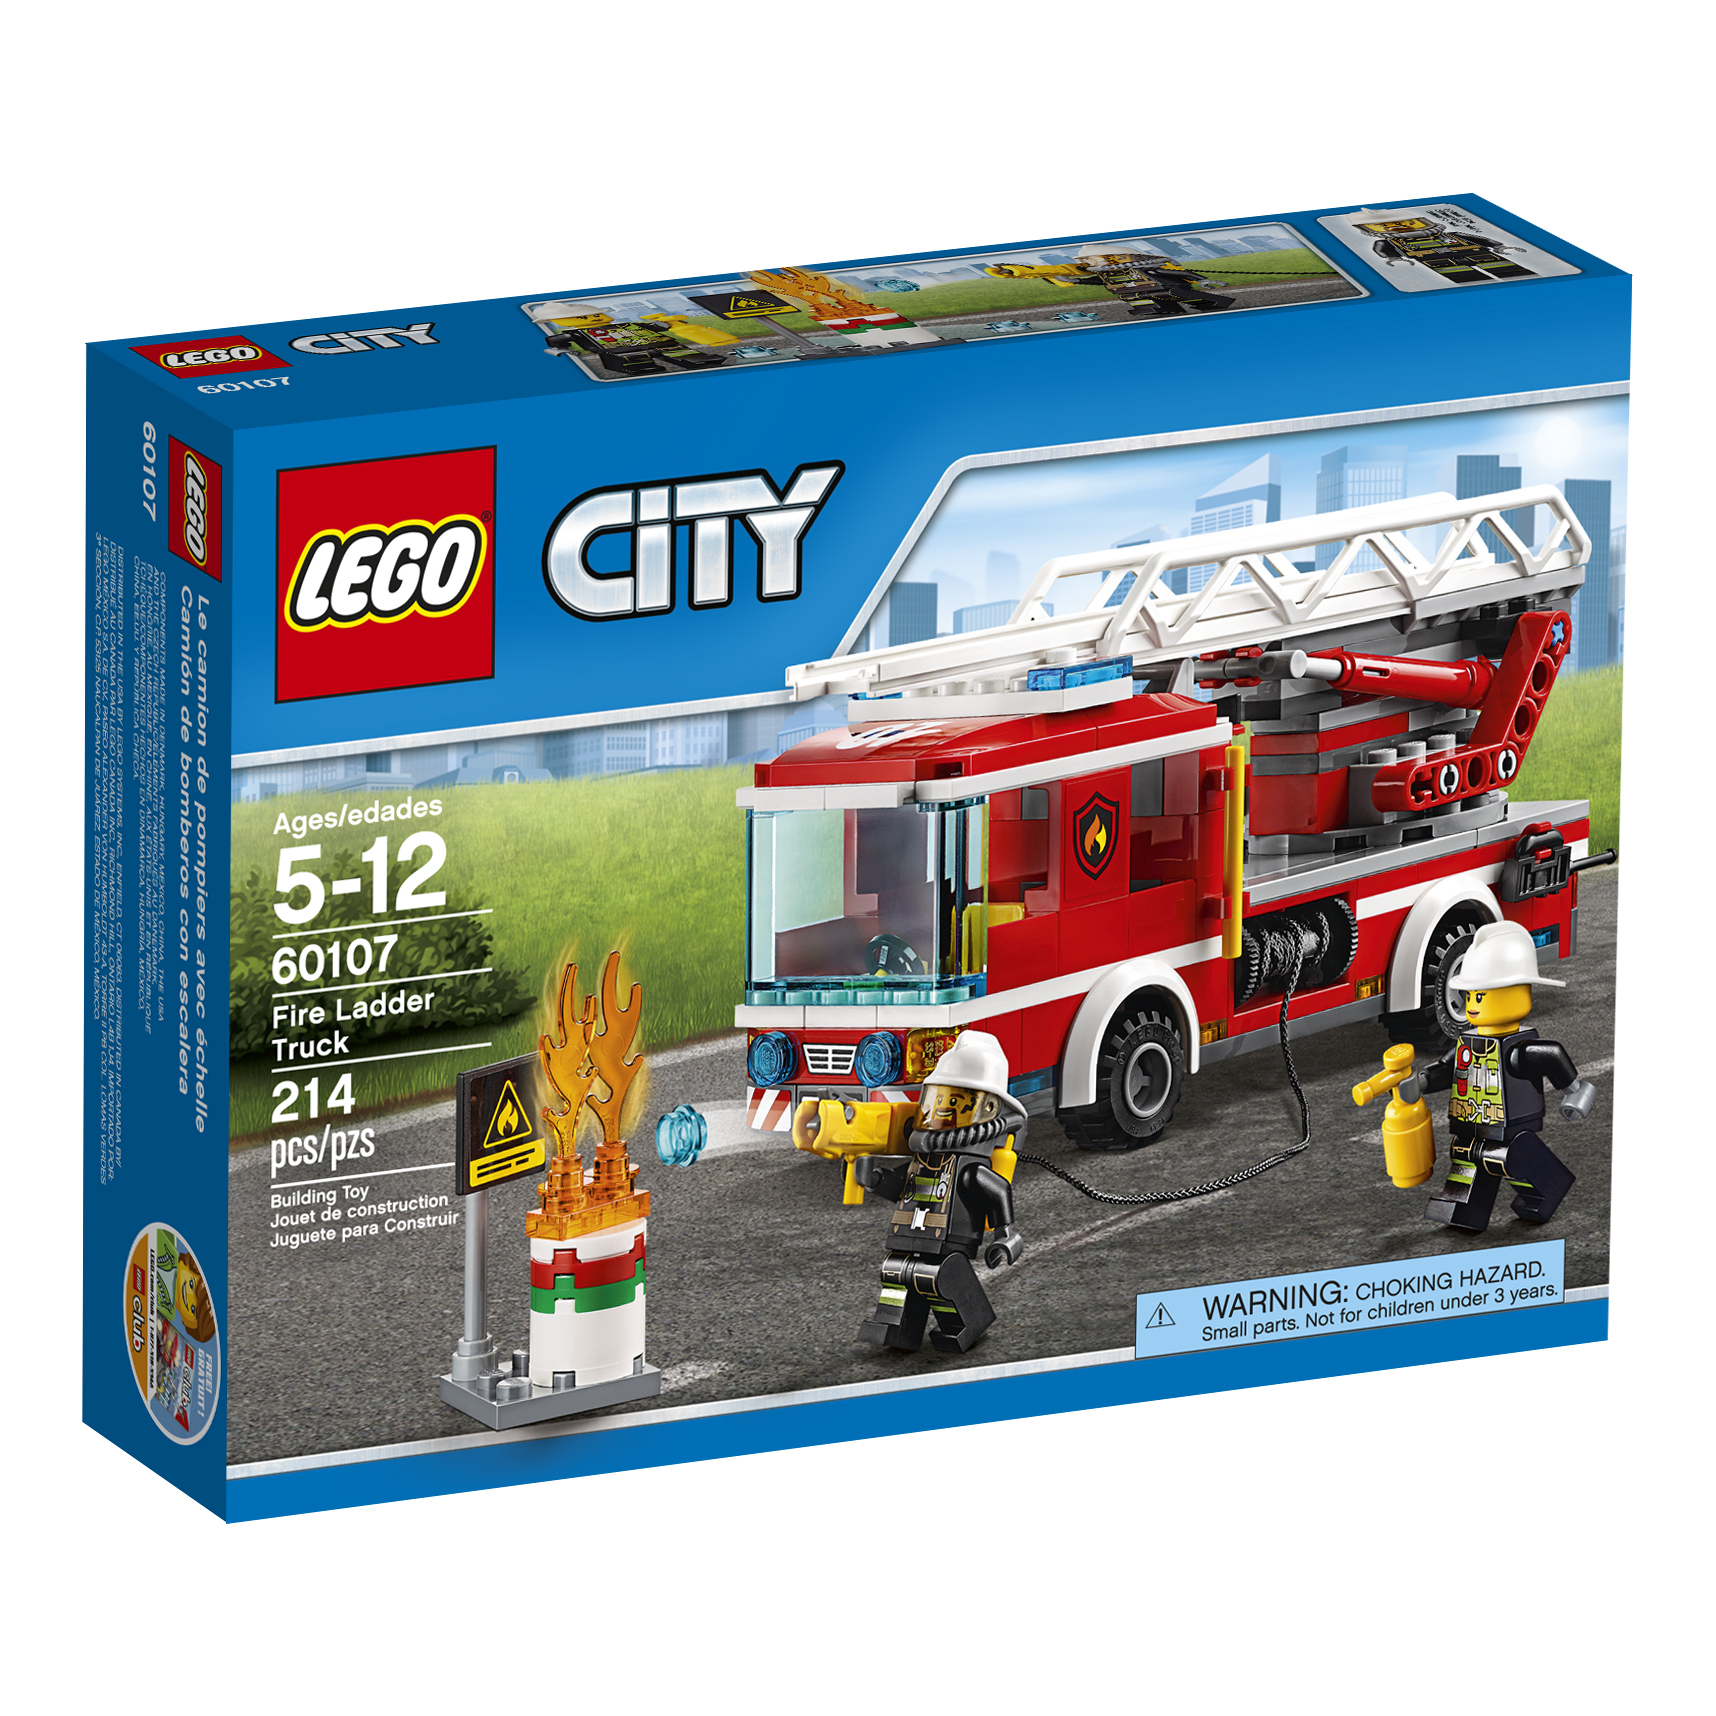 LEGO City Fire Fire Ladder Truck 60107 - image 3 of 4